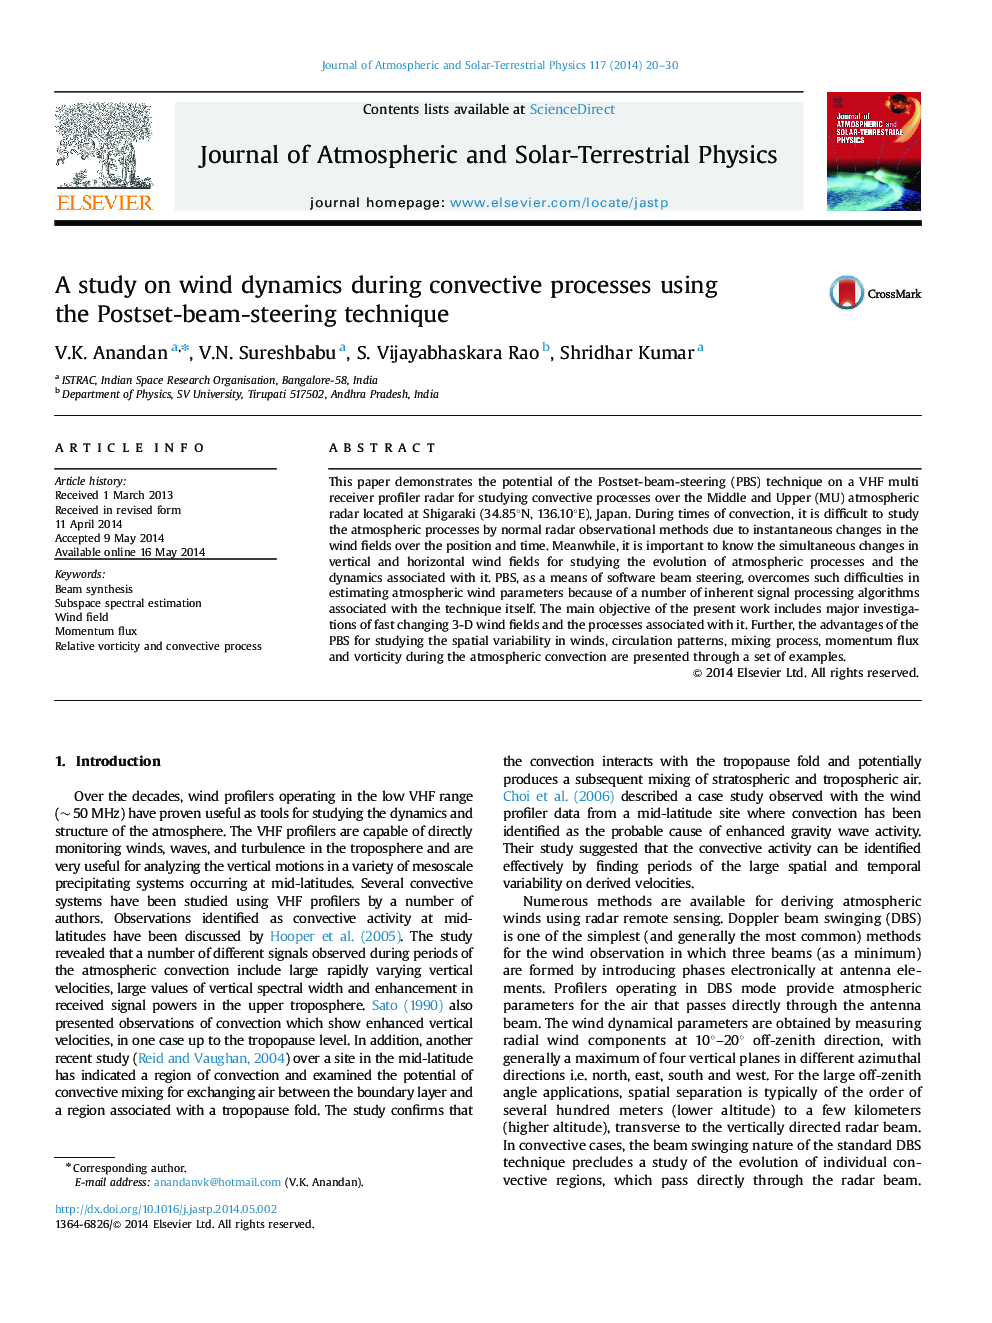 A study on wind dynamics during convective processes using the Postset-beam-steering technique